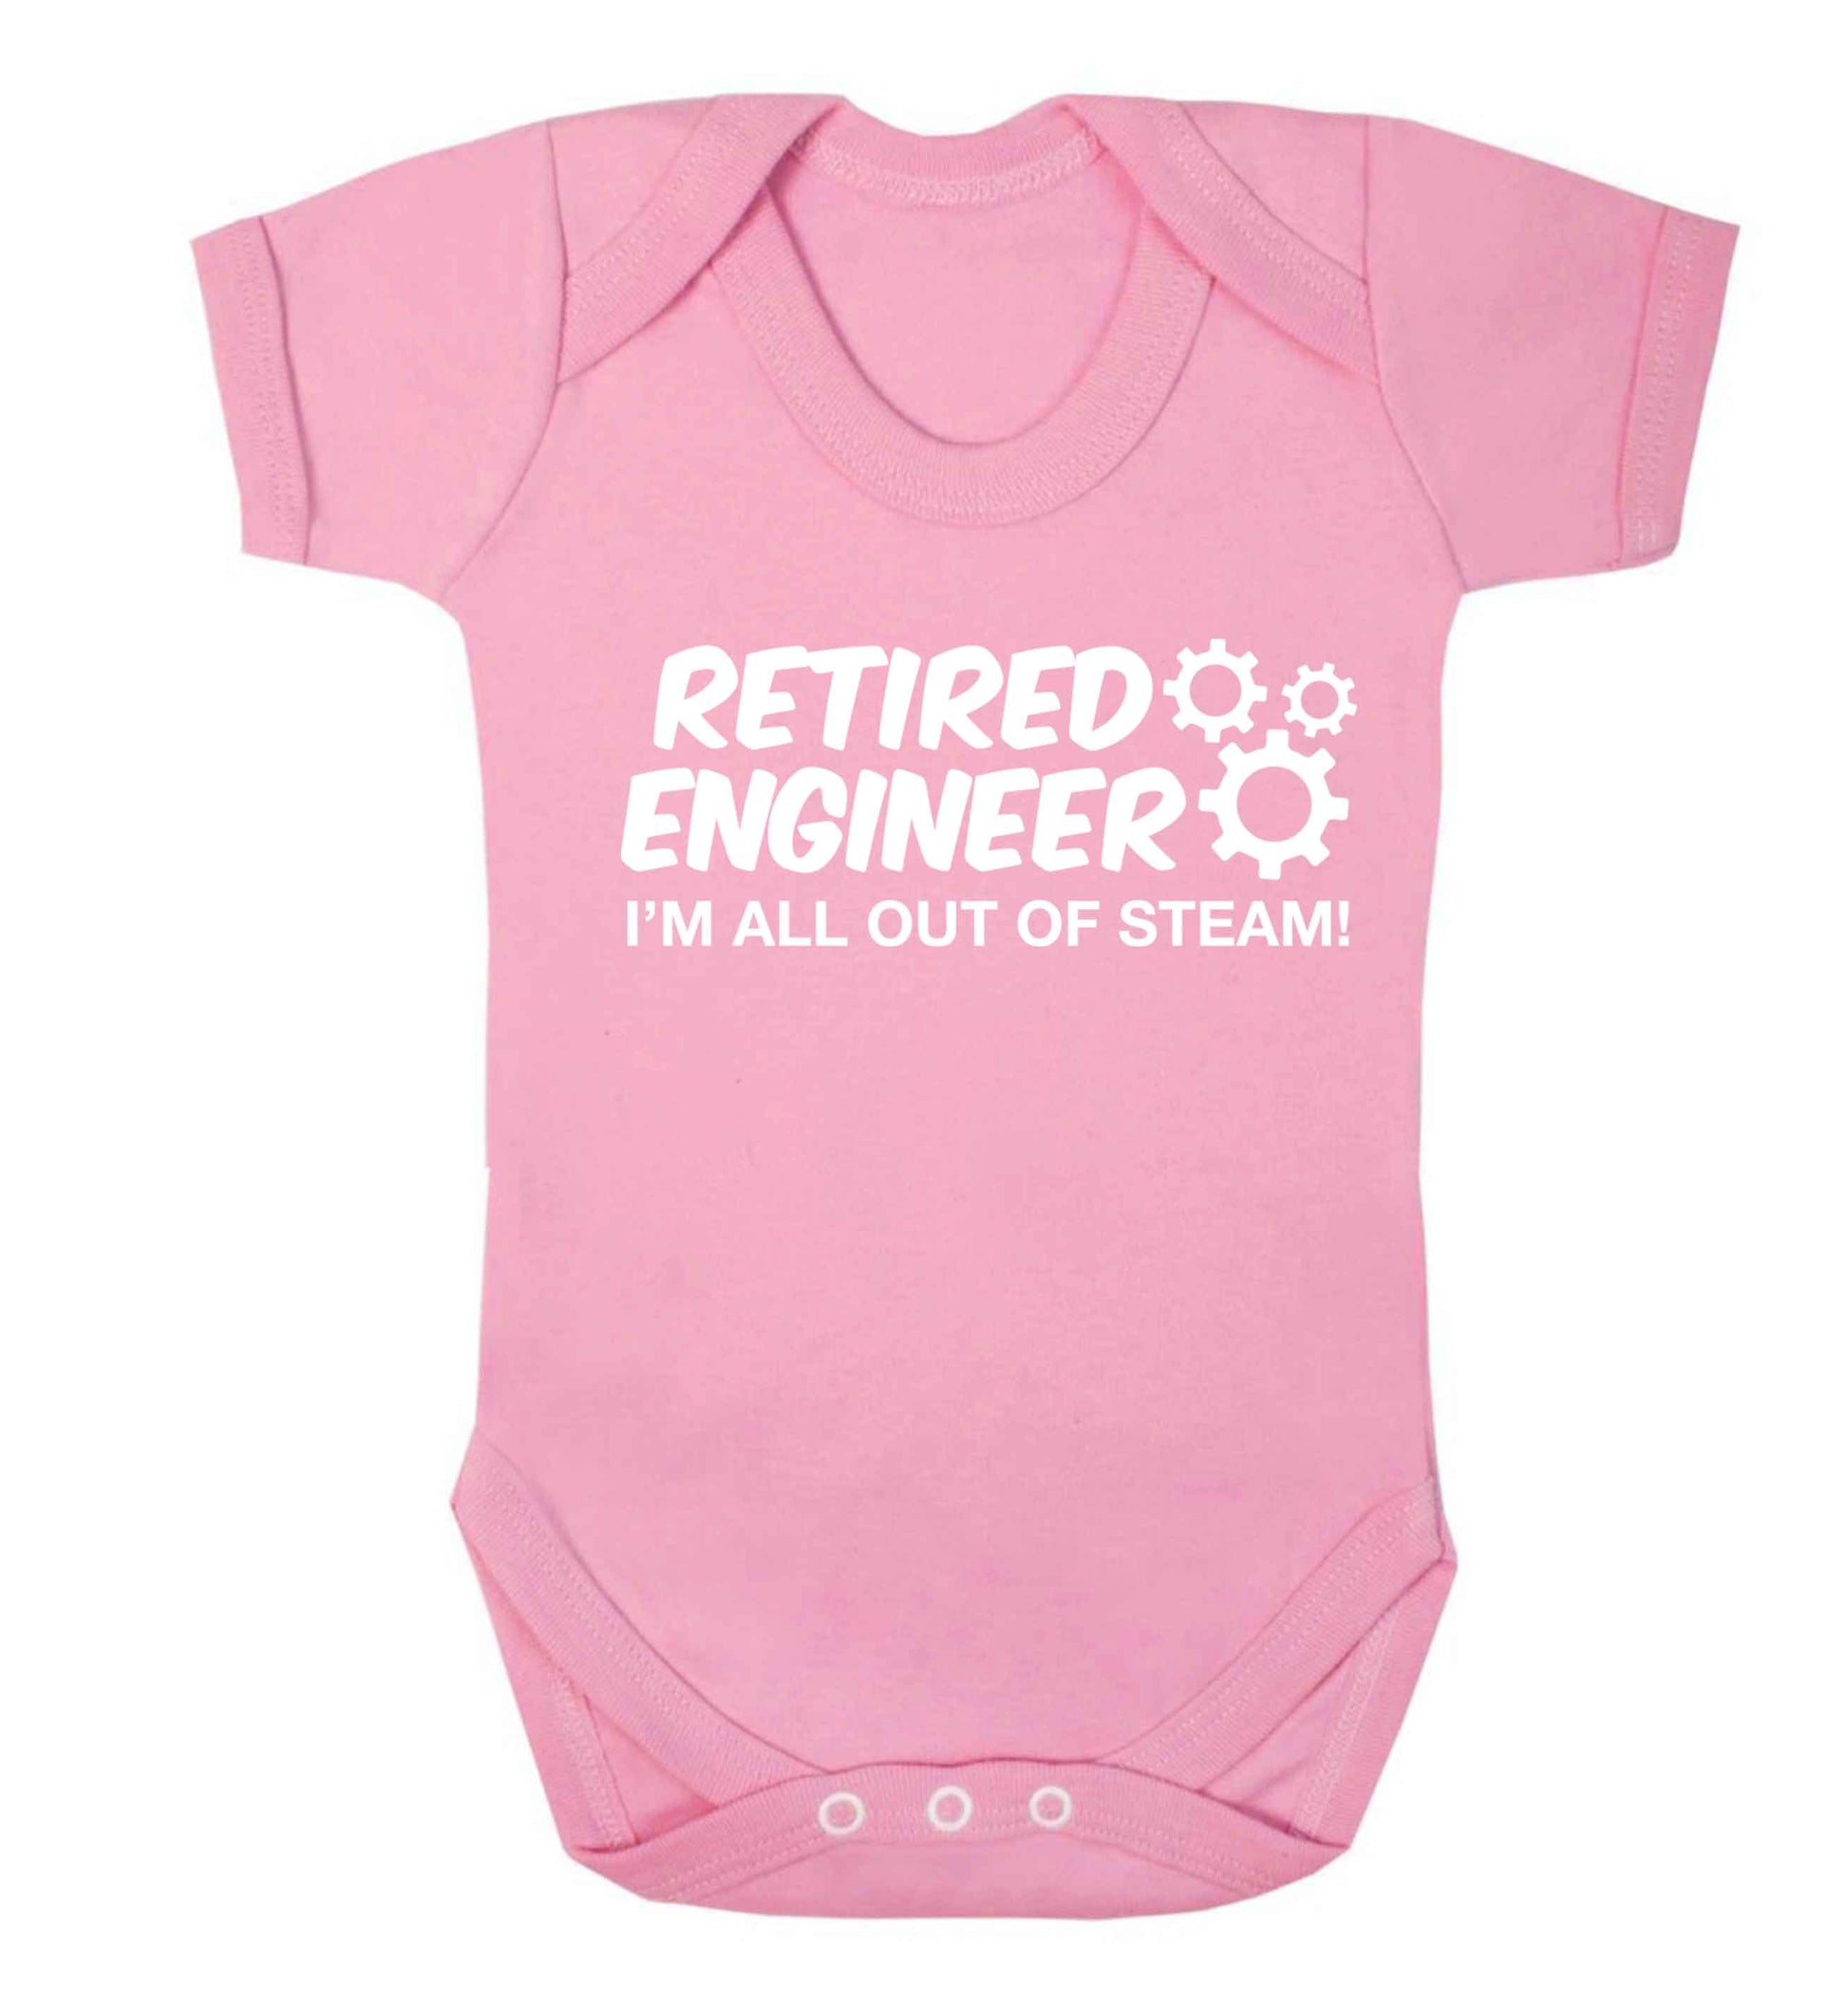 Retired engineer I'm all out of steam Baby Vest pale pink 18-24 months